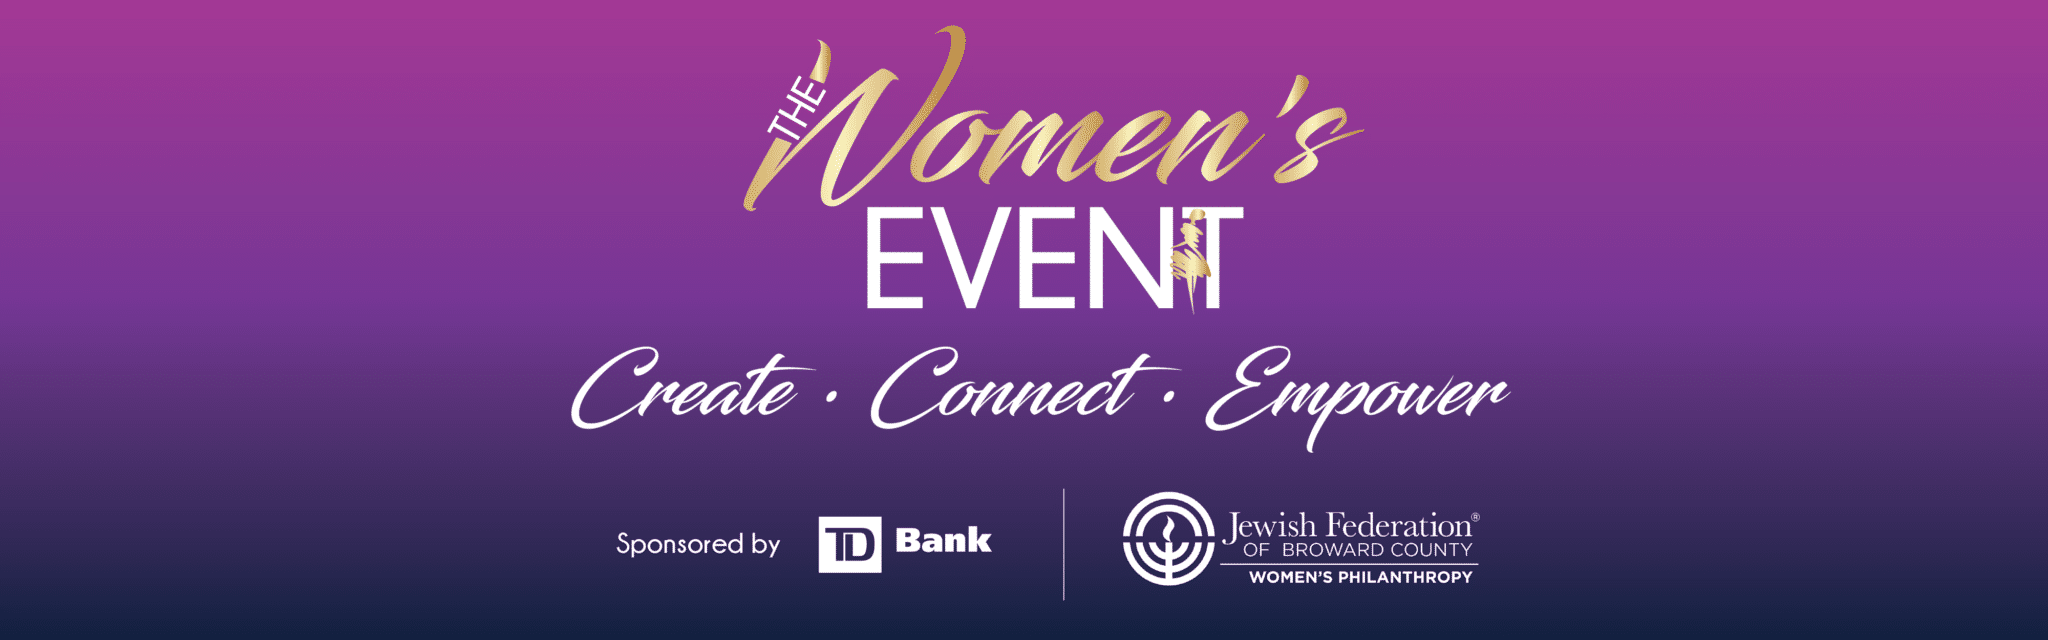 The Women's Day Registration | Jewish Federation of Broward County